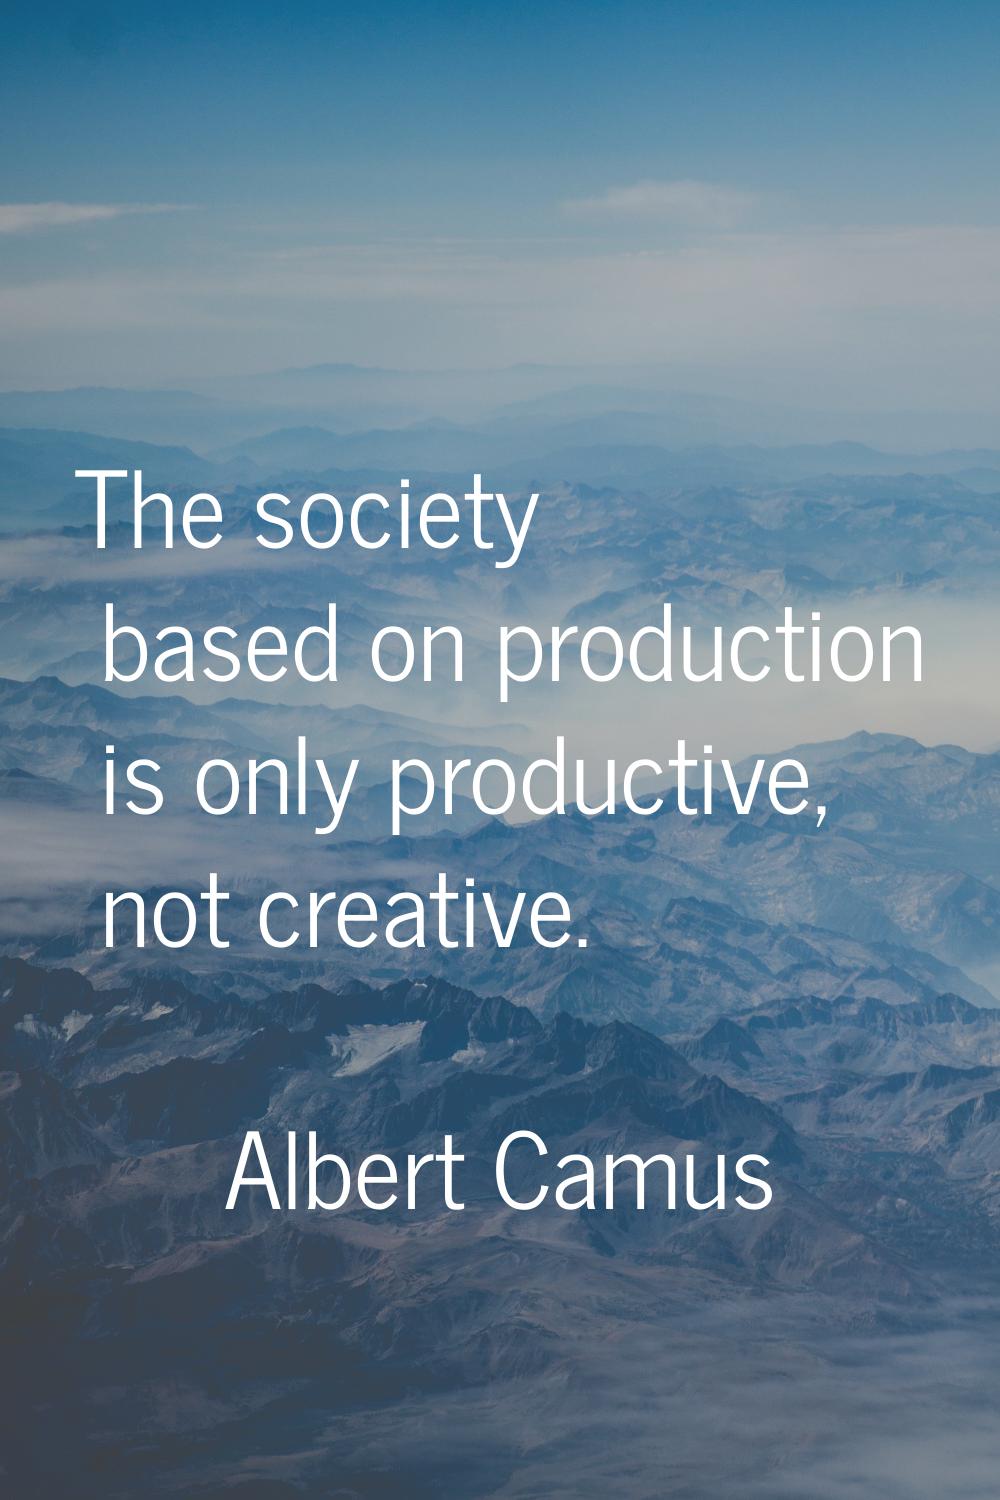 The society based on production is only productive, not creative.